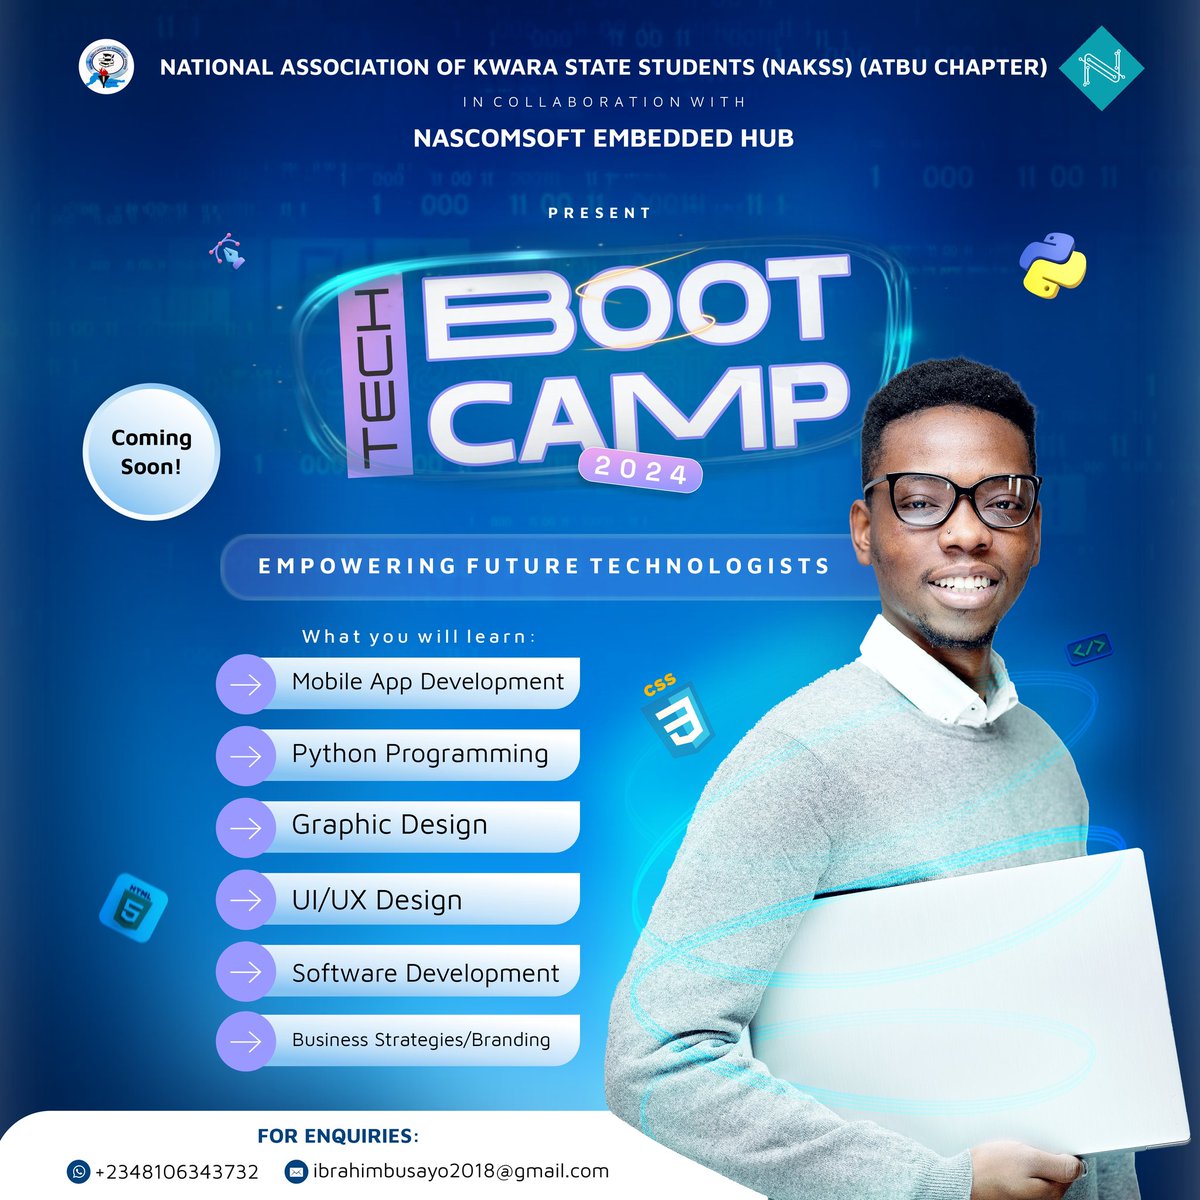 🚀 Exciting Opportunity Alert! 🚀

forms.gle/pFq1FfhQLsxXdx…

Are you ready to take your tech skills to the next level?

The *National Association of Kwara State Students (NAKSS) ATBU* In collaboration with *NASCOMSOFT EMBEDDED HUB* Tech Boot Camp is an intensive educational